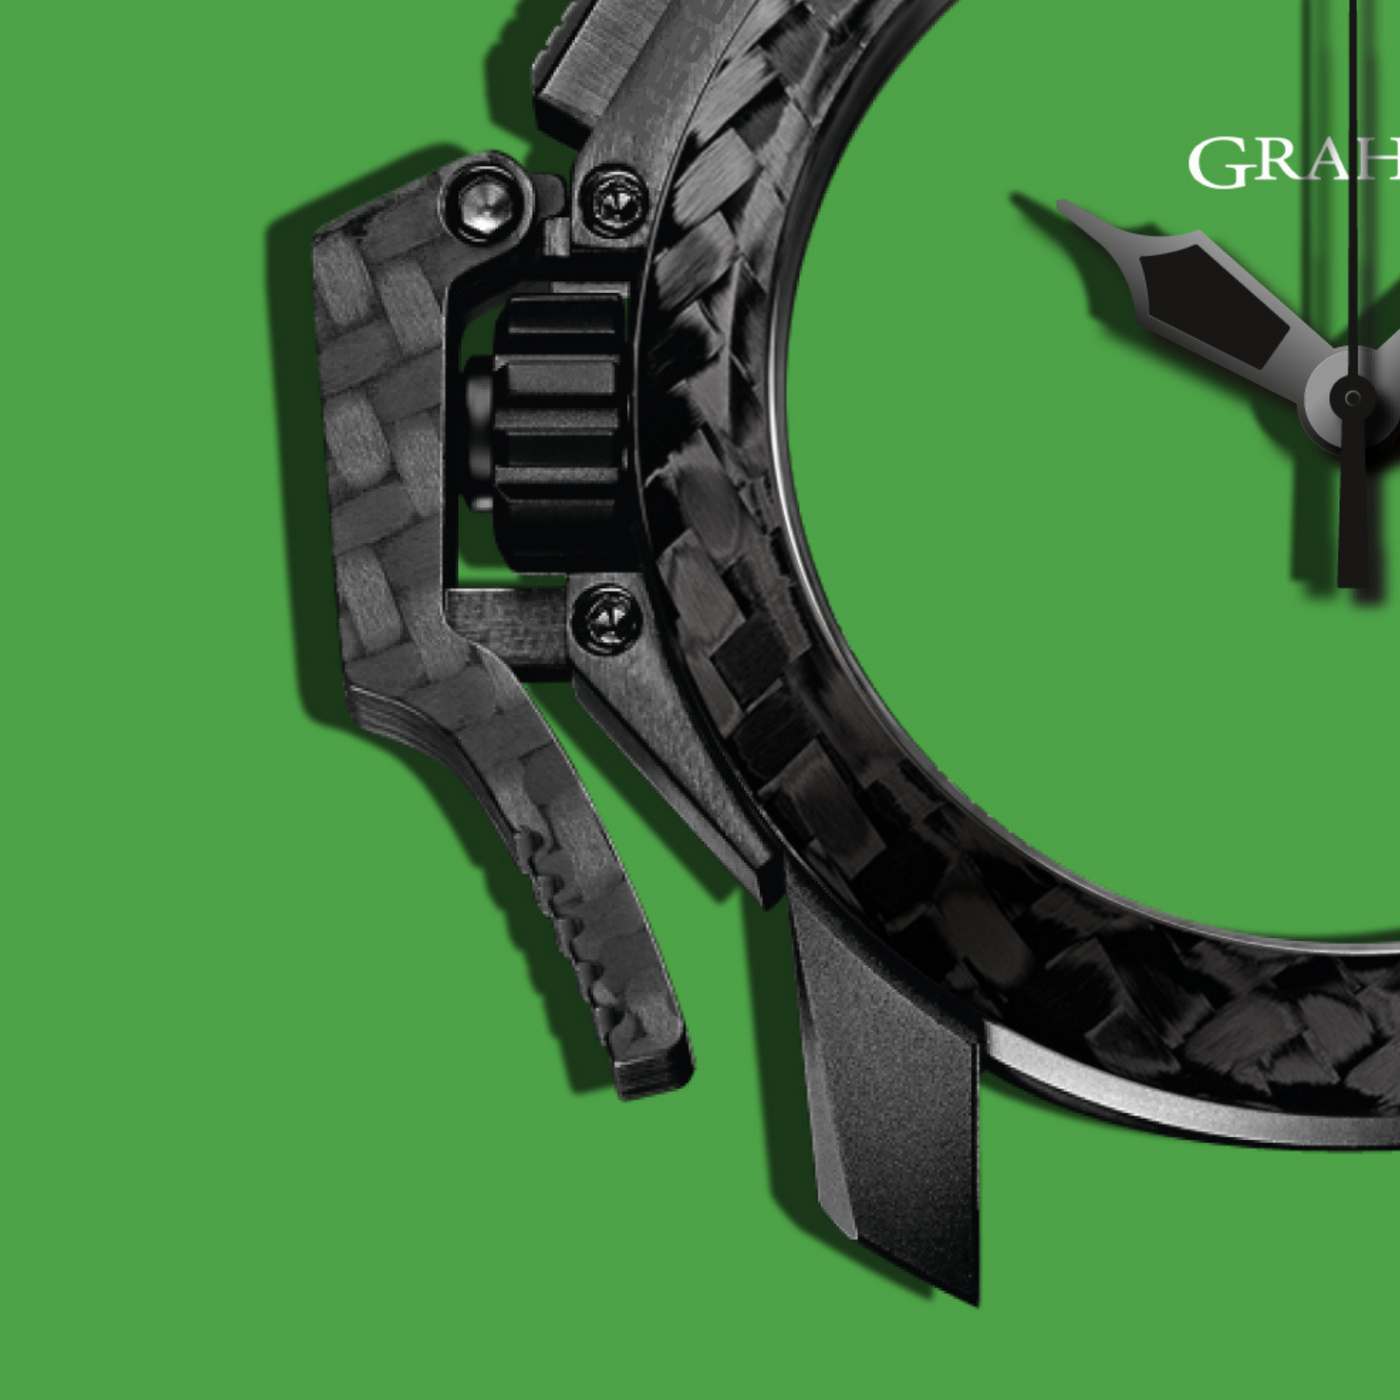 CHRONOFIGHTER SUPERLIGHT CARBON (GREEN)